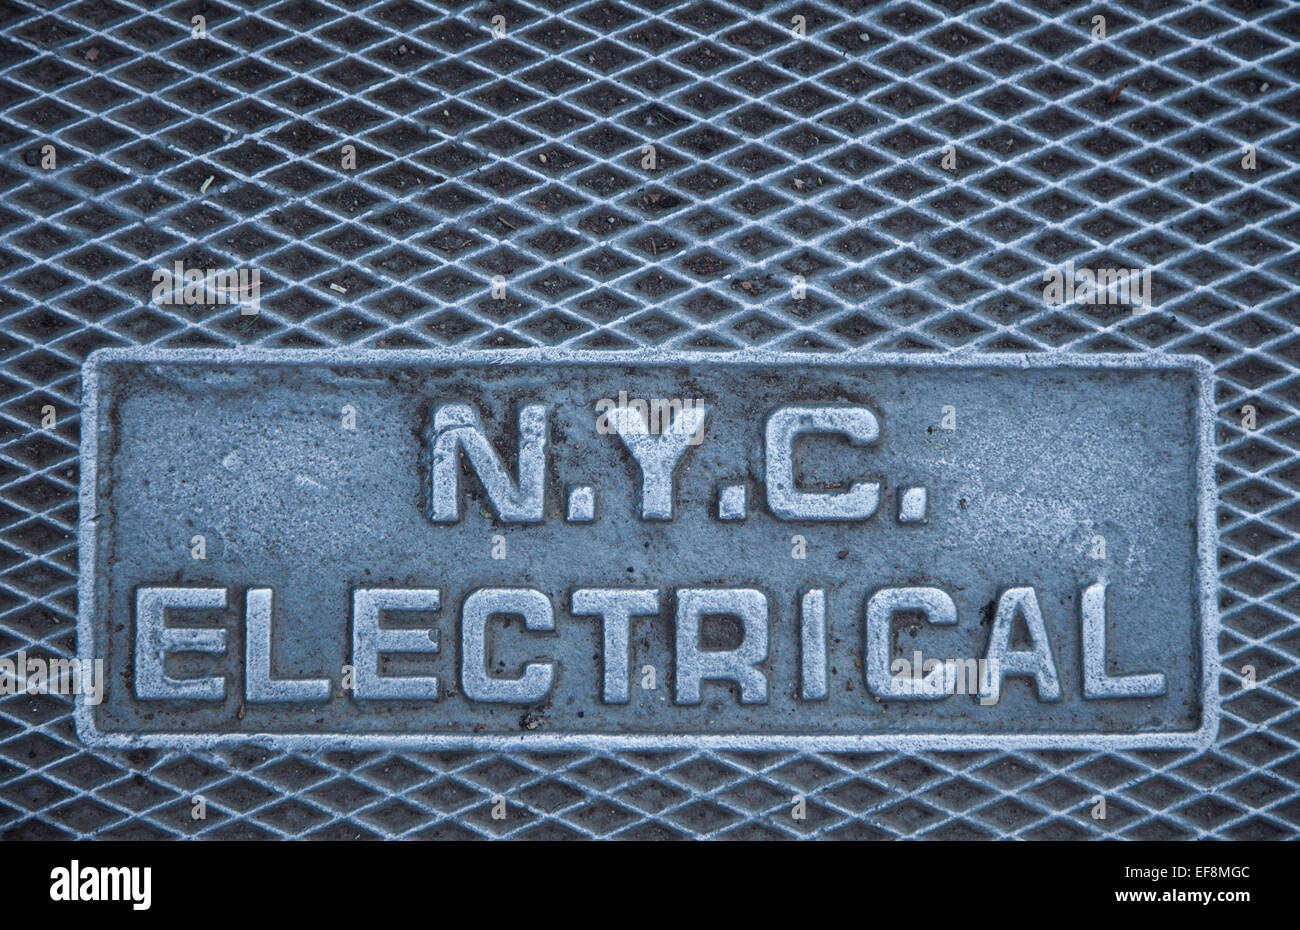 NYC Electrical energy supply Stock Photo